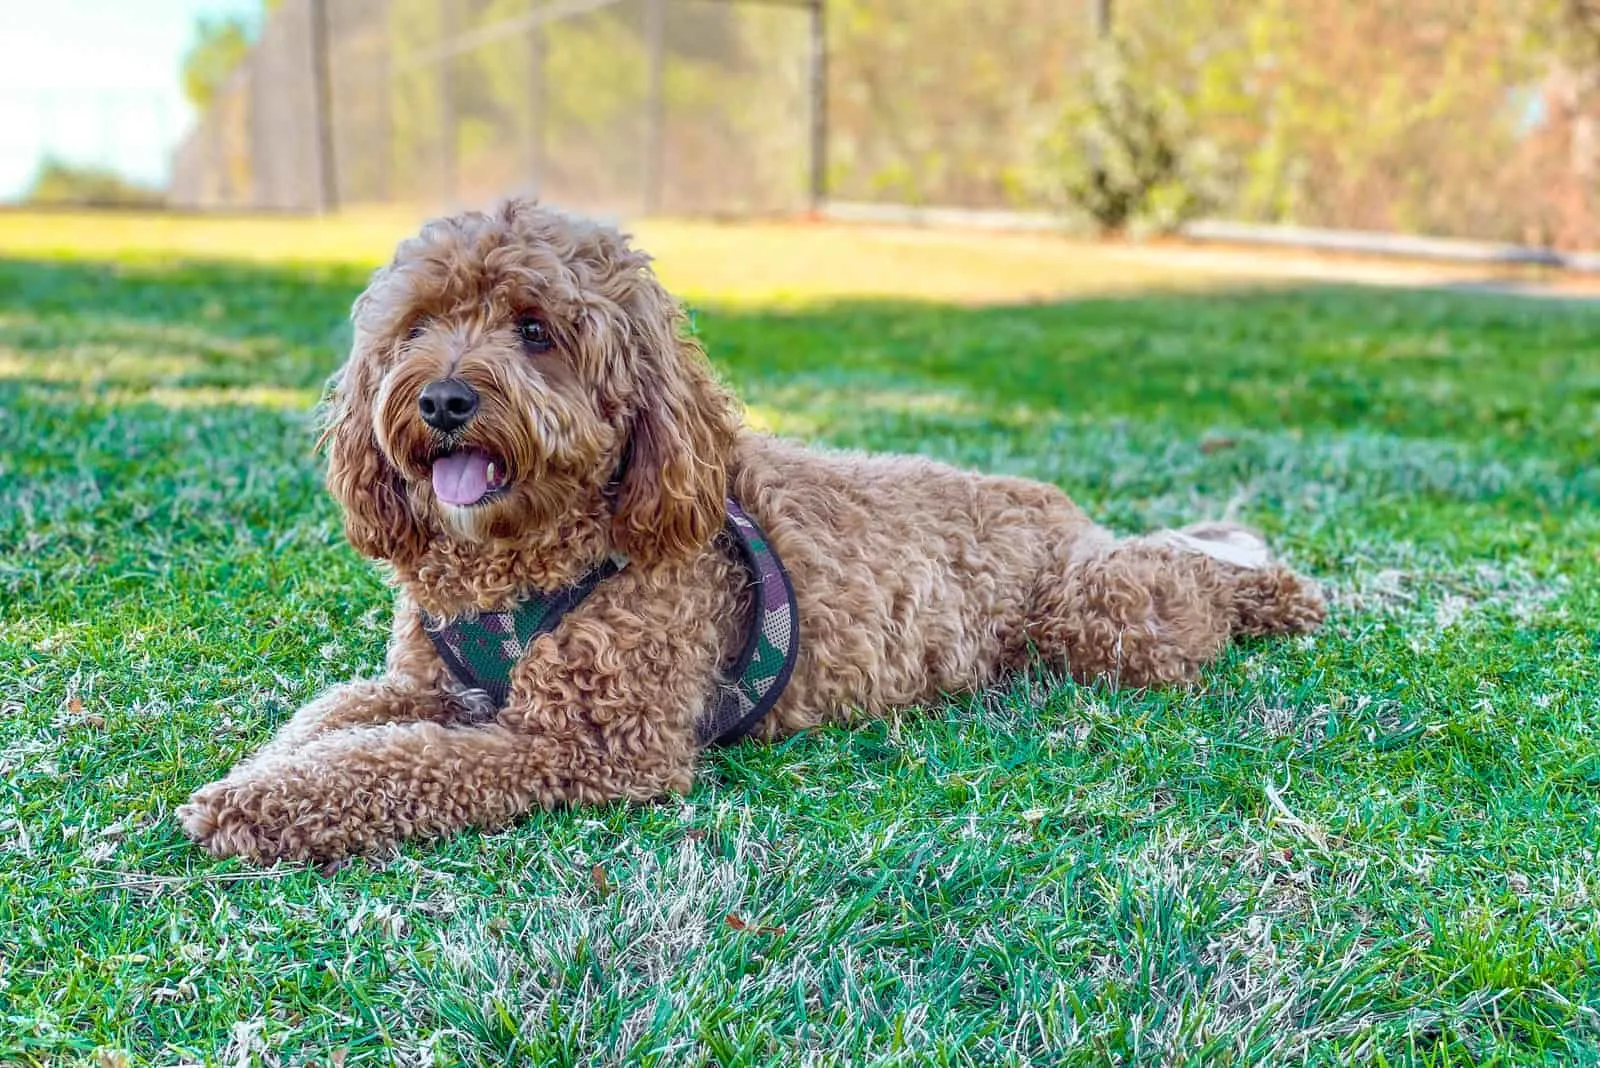 Cavapoo dog in the park, mixed -breed of Cavalier King Charles Spaniel and Poodle